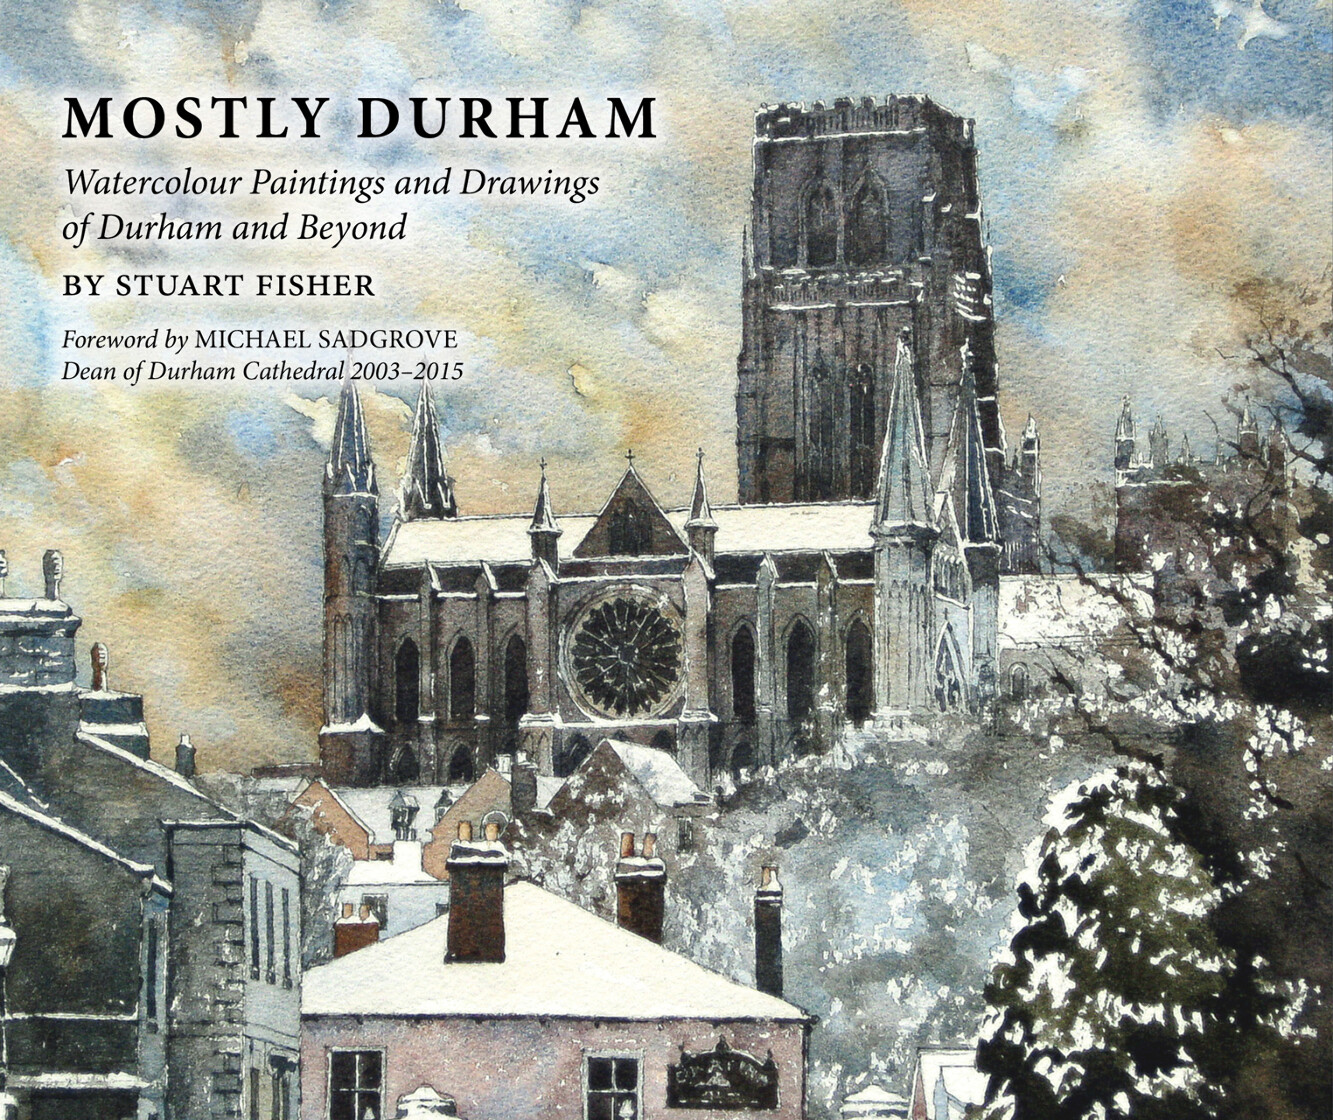 Mostly Durham: Watercolour Paintings and Drawings of Durham and Beyond - product image